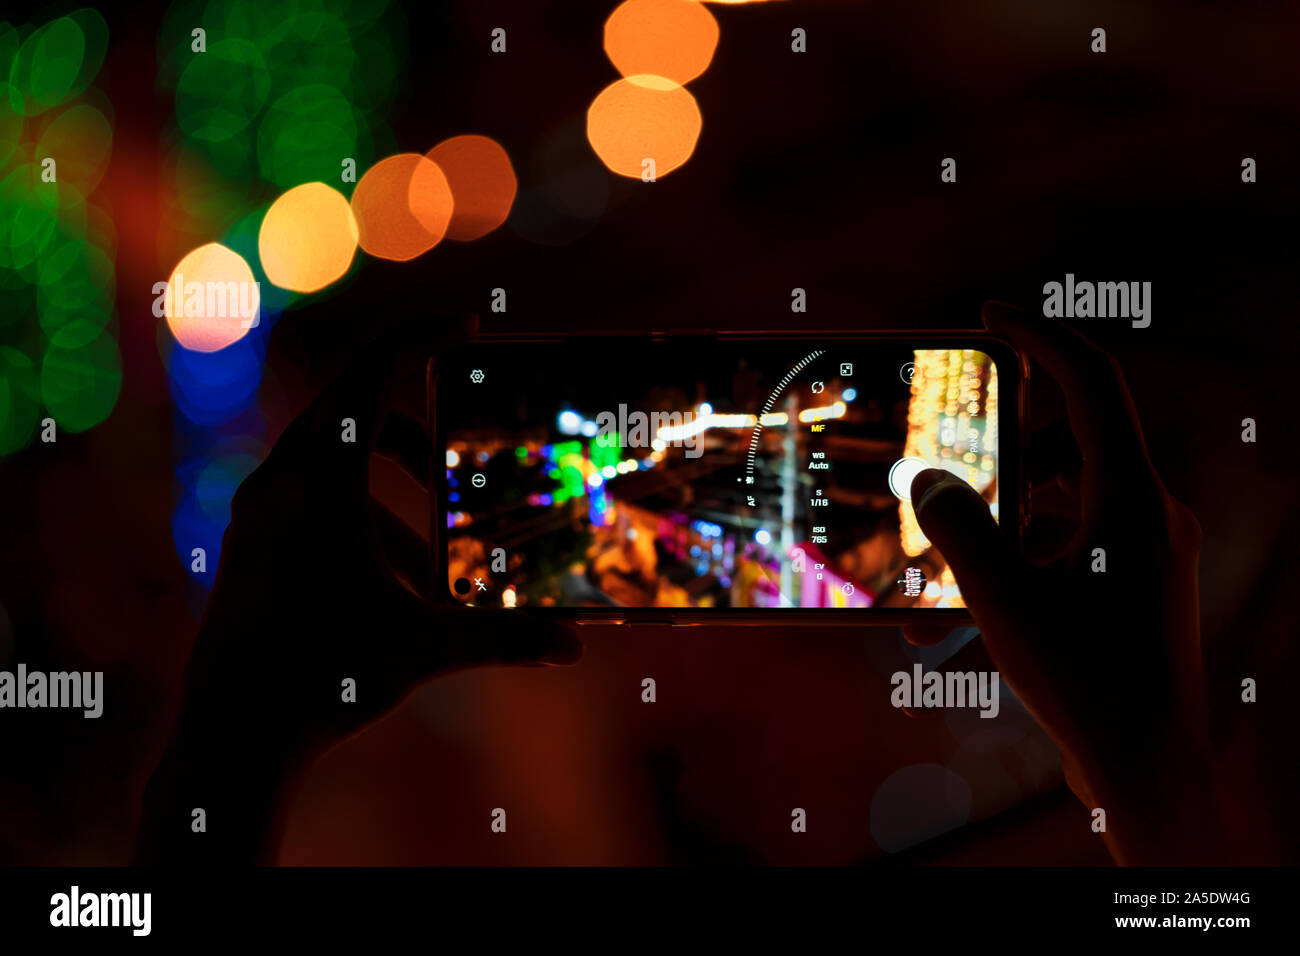 Person holding smart phone & capturing photo of festive decorations at night. Background image for street mobile photography, Diwali celebration. Stock Photo